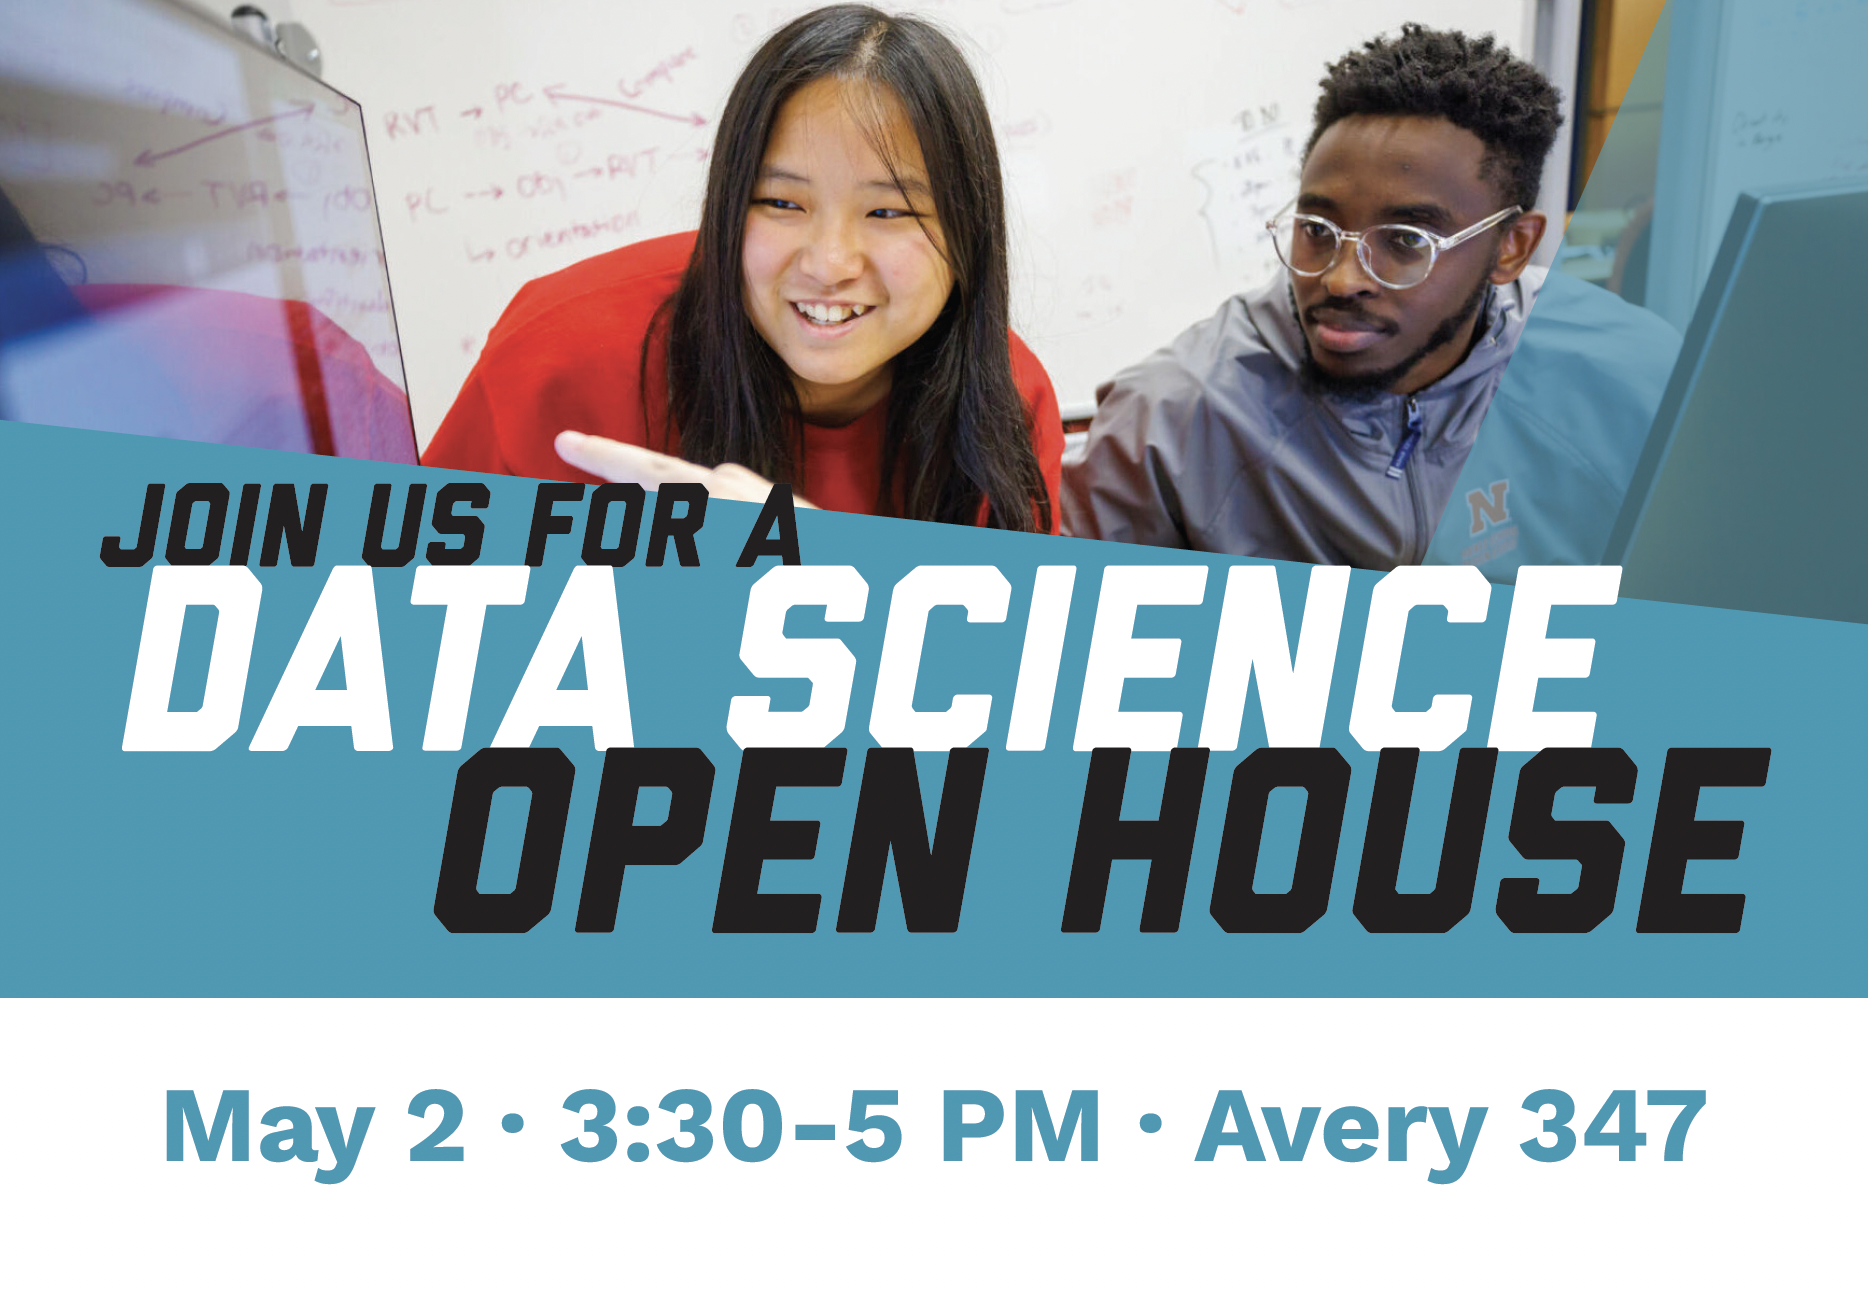 Attend our Data Science Open House event on May 2.